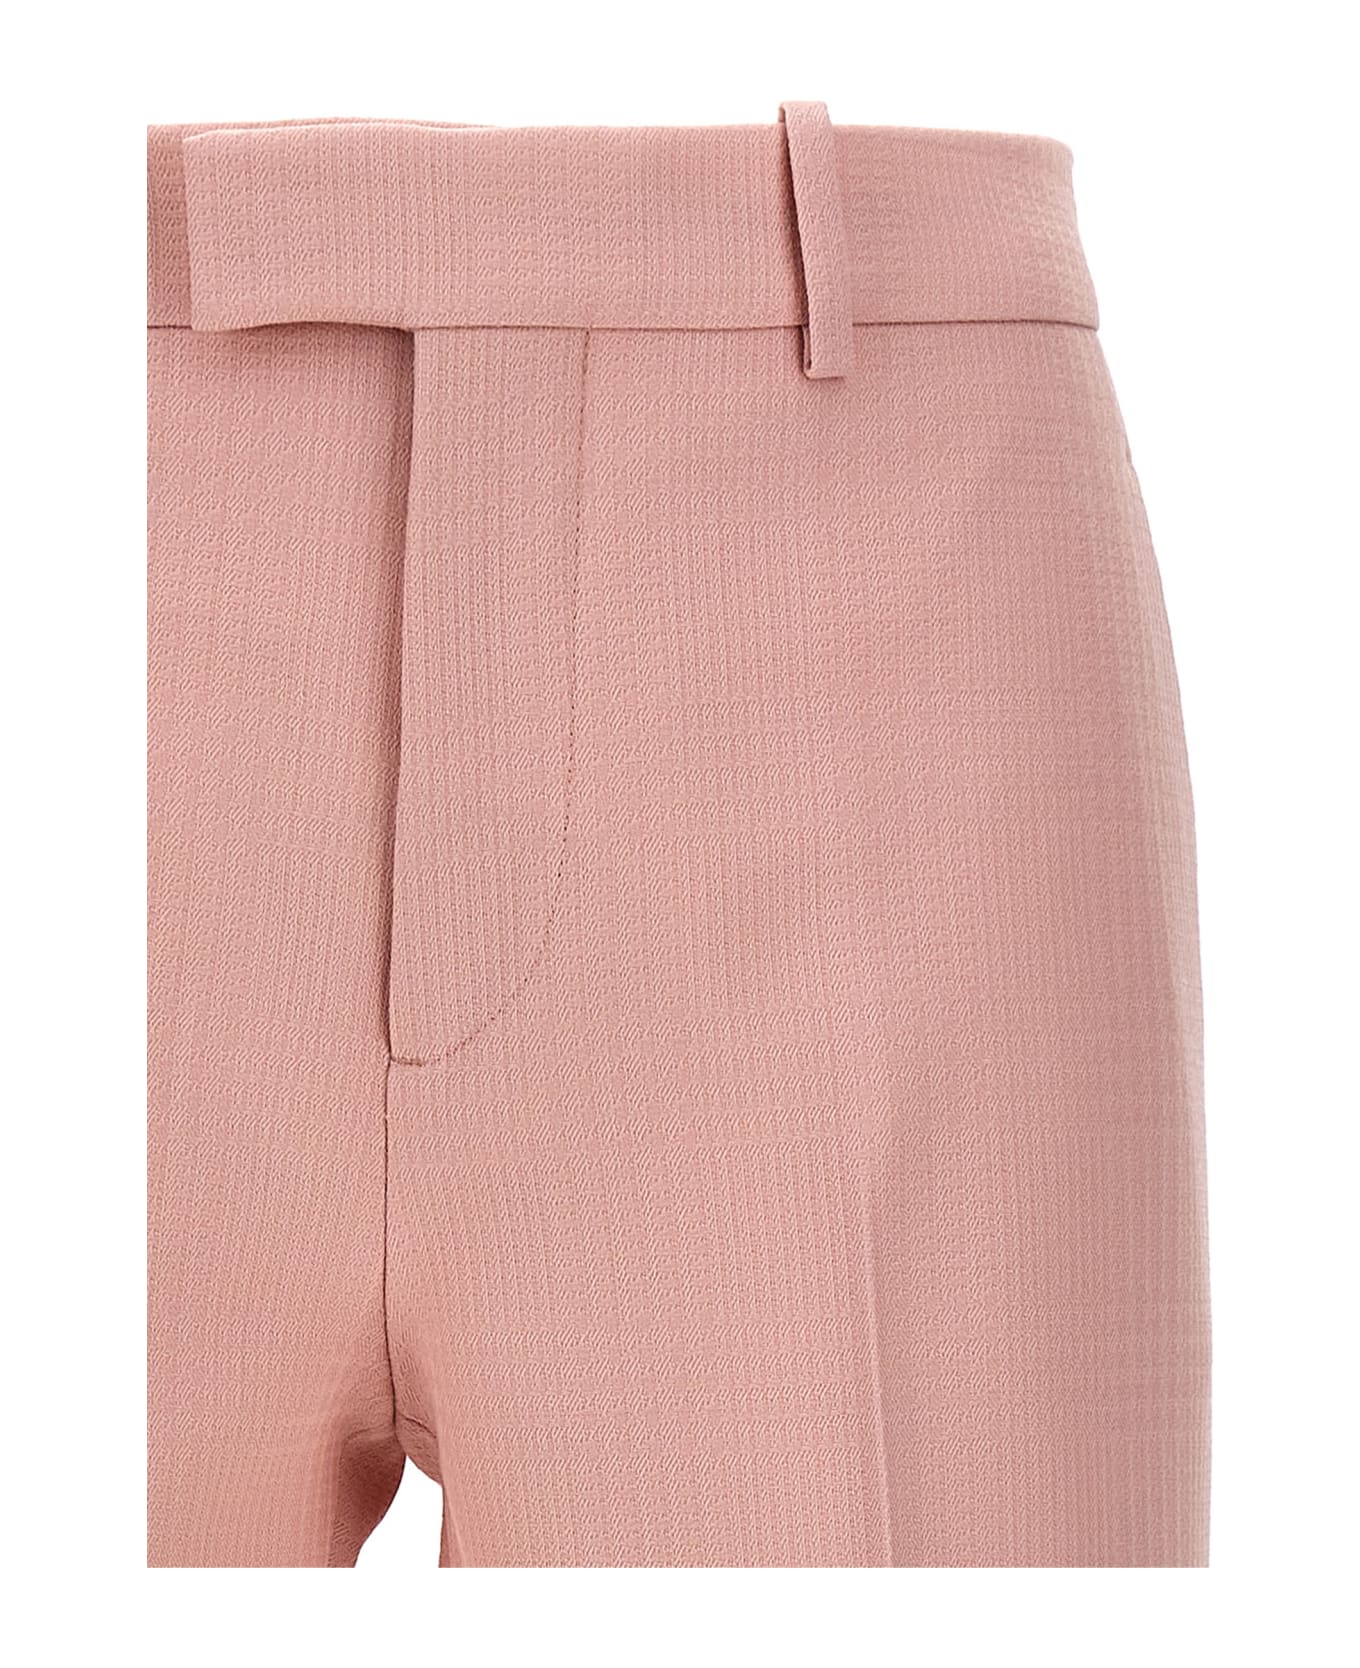 Burberry Tailored Trousers - Pink ボトムス